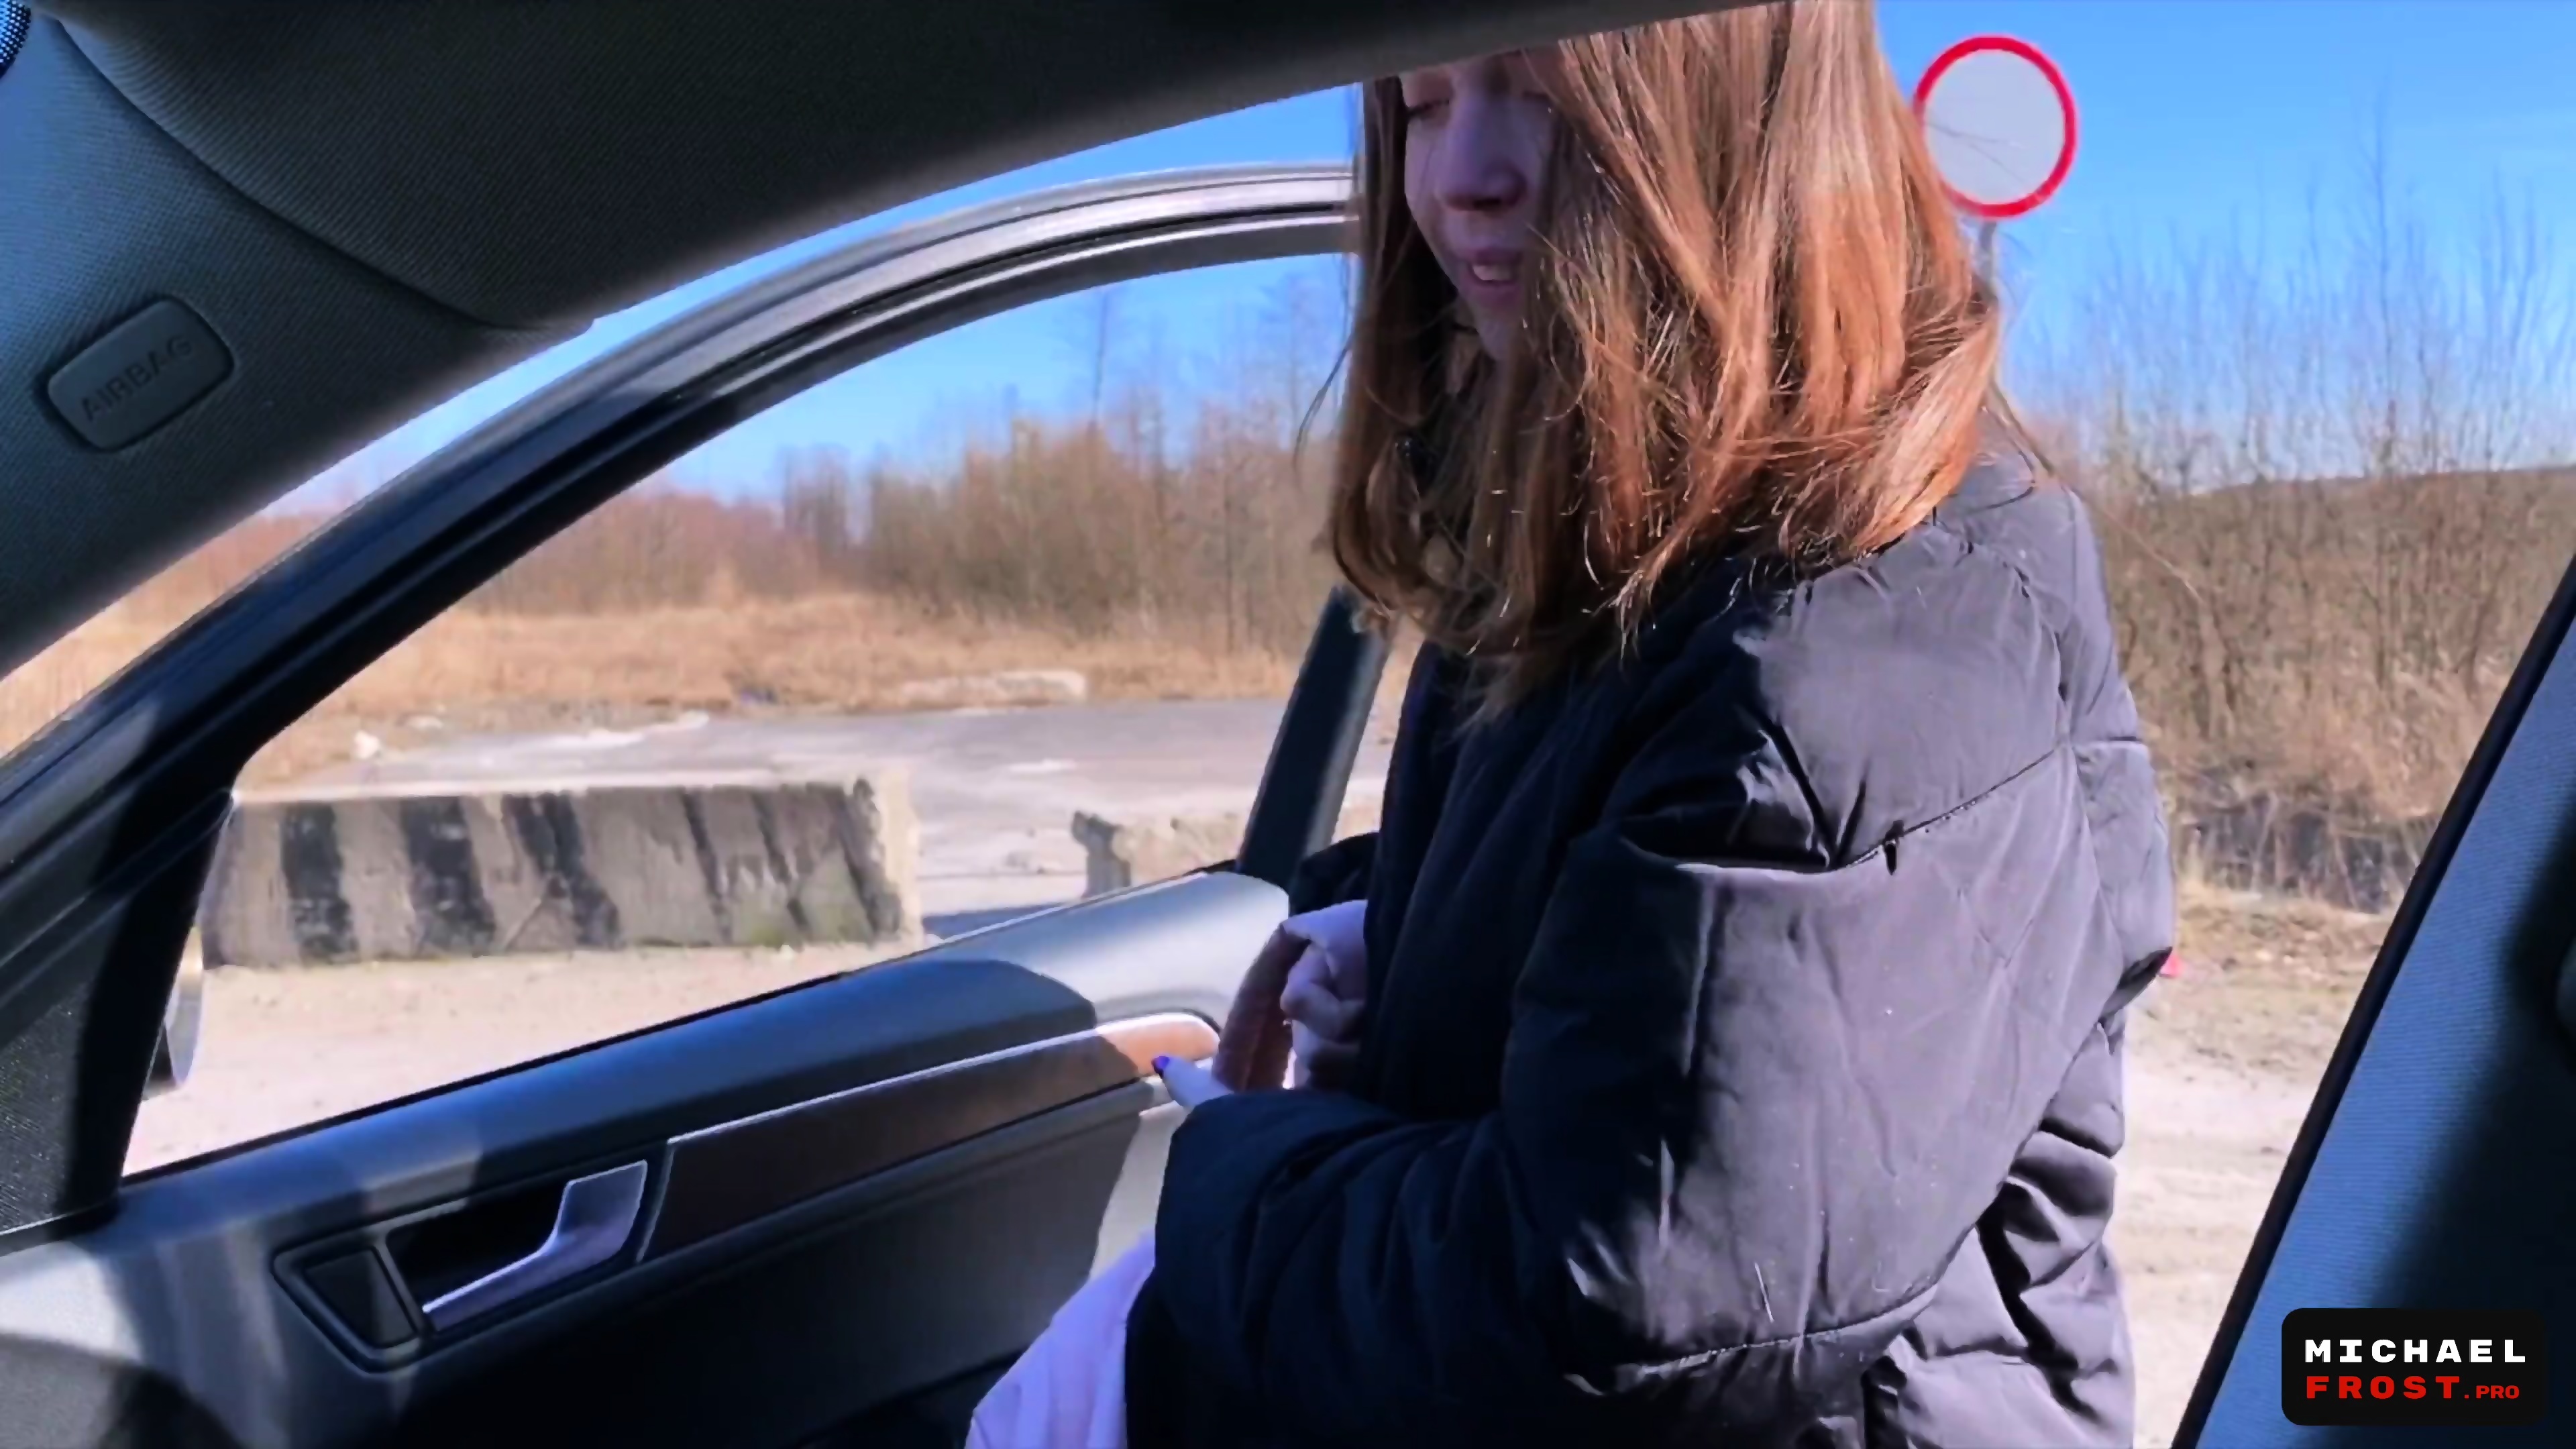 Naive Girl Hitchhiker Thought It Would Ride Free XhnuHk